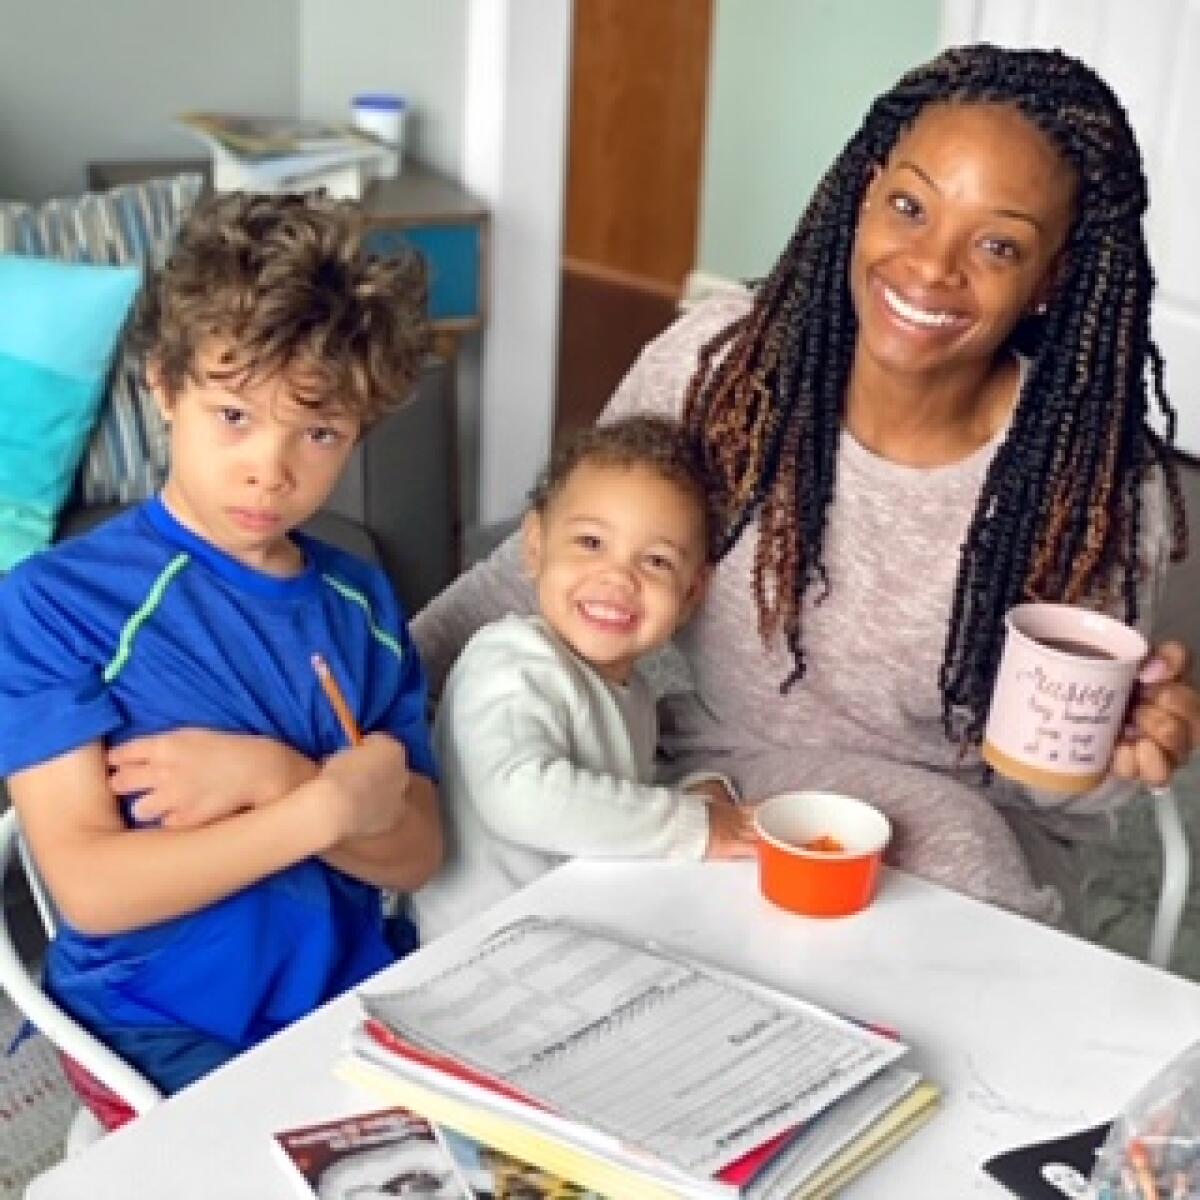 Gabrielle Flowers Rader, a lifestyle influencer and fitness coach from Indiana, helps her children with their schoolwork from home.